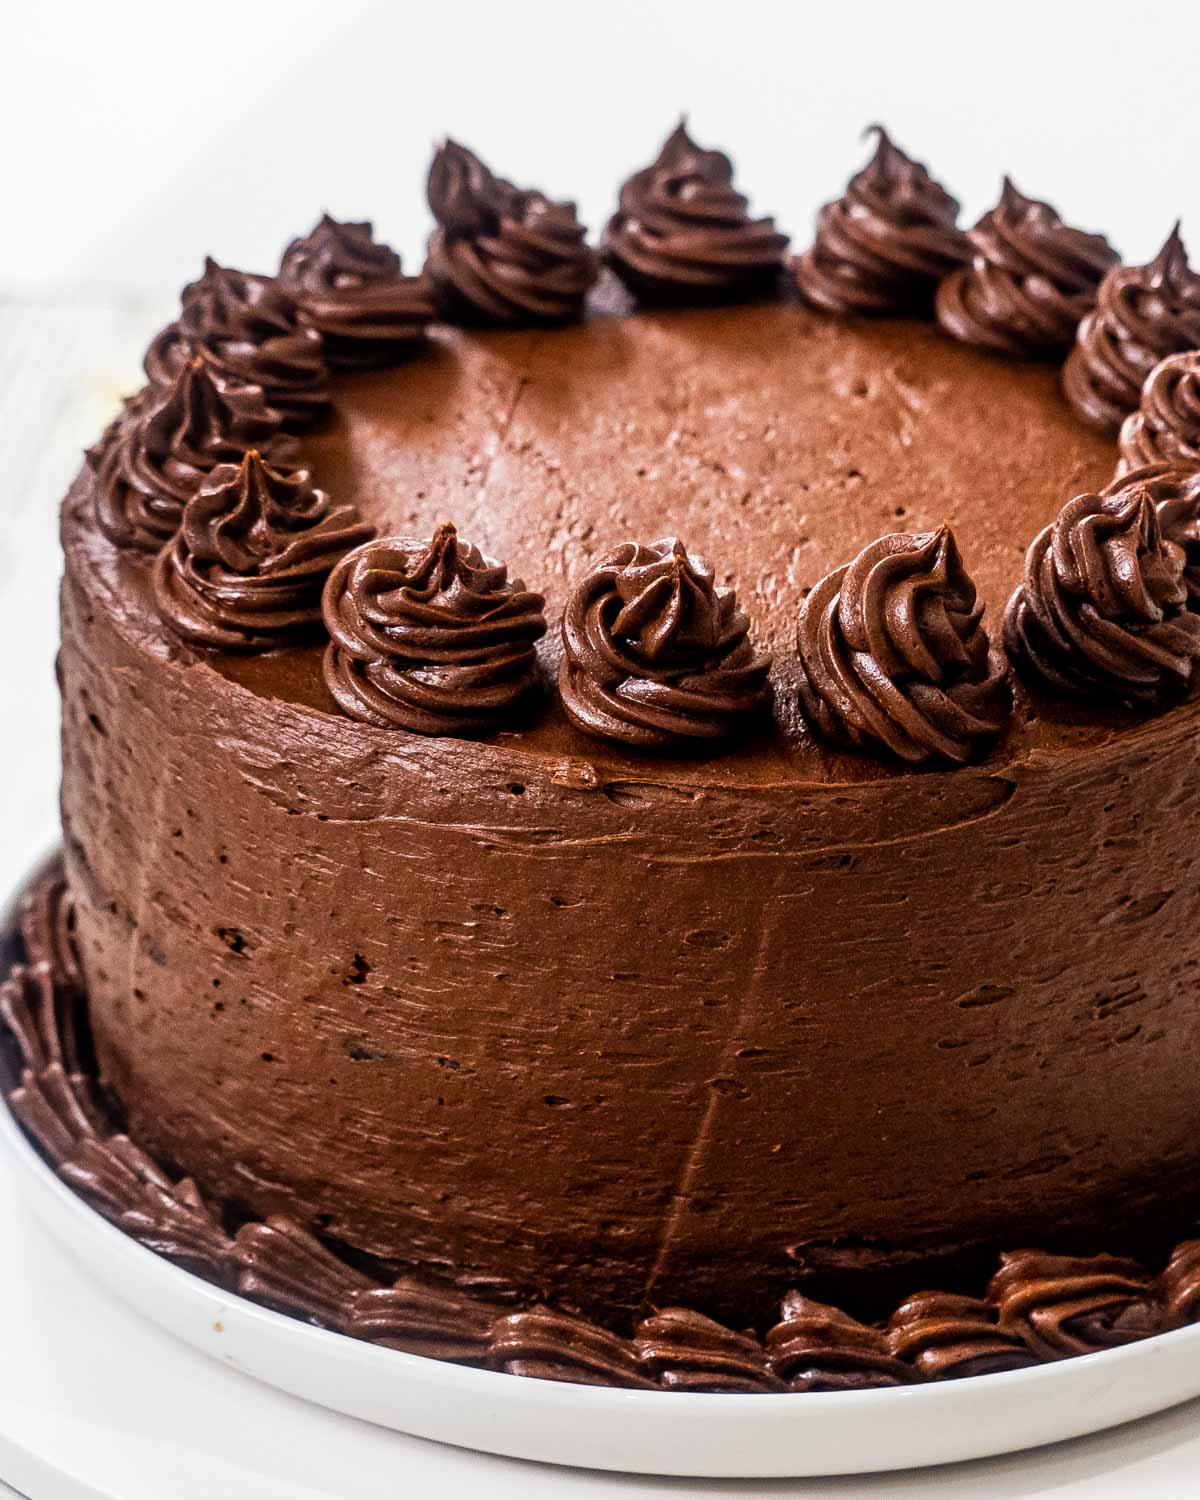 a cake frosted with chocolate frosting.